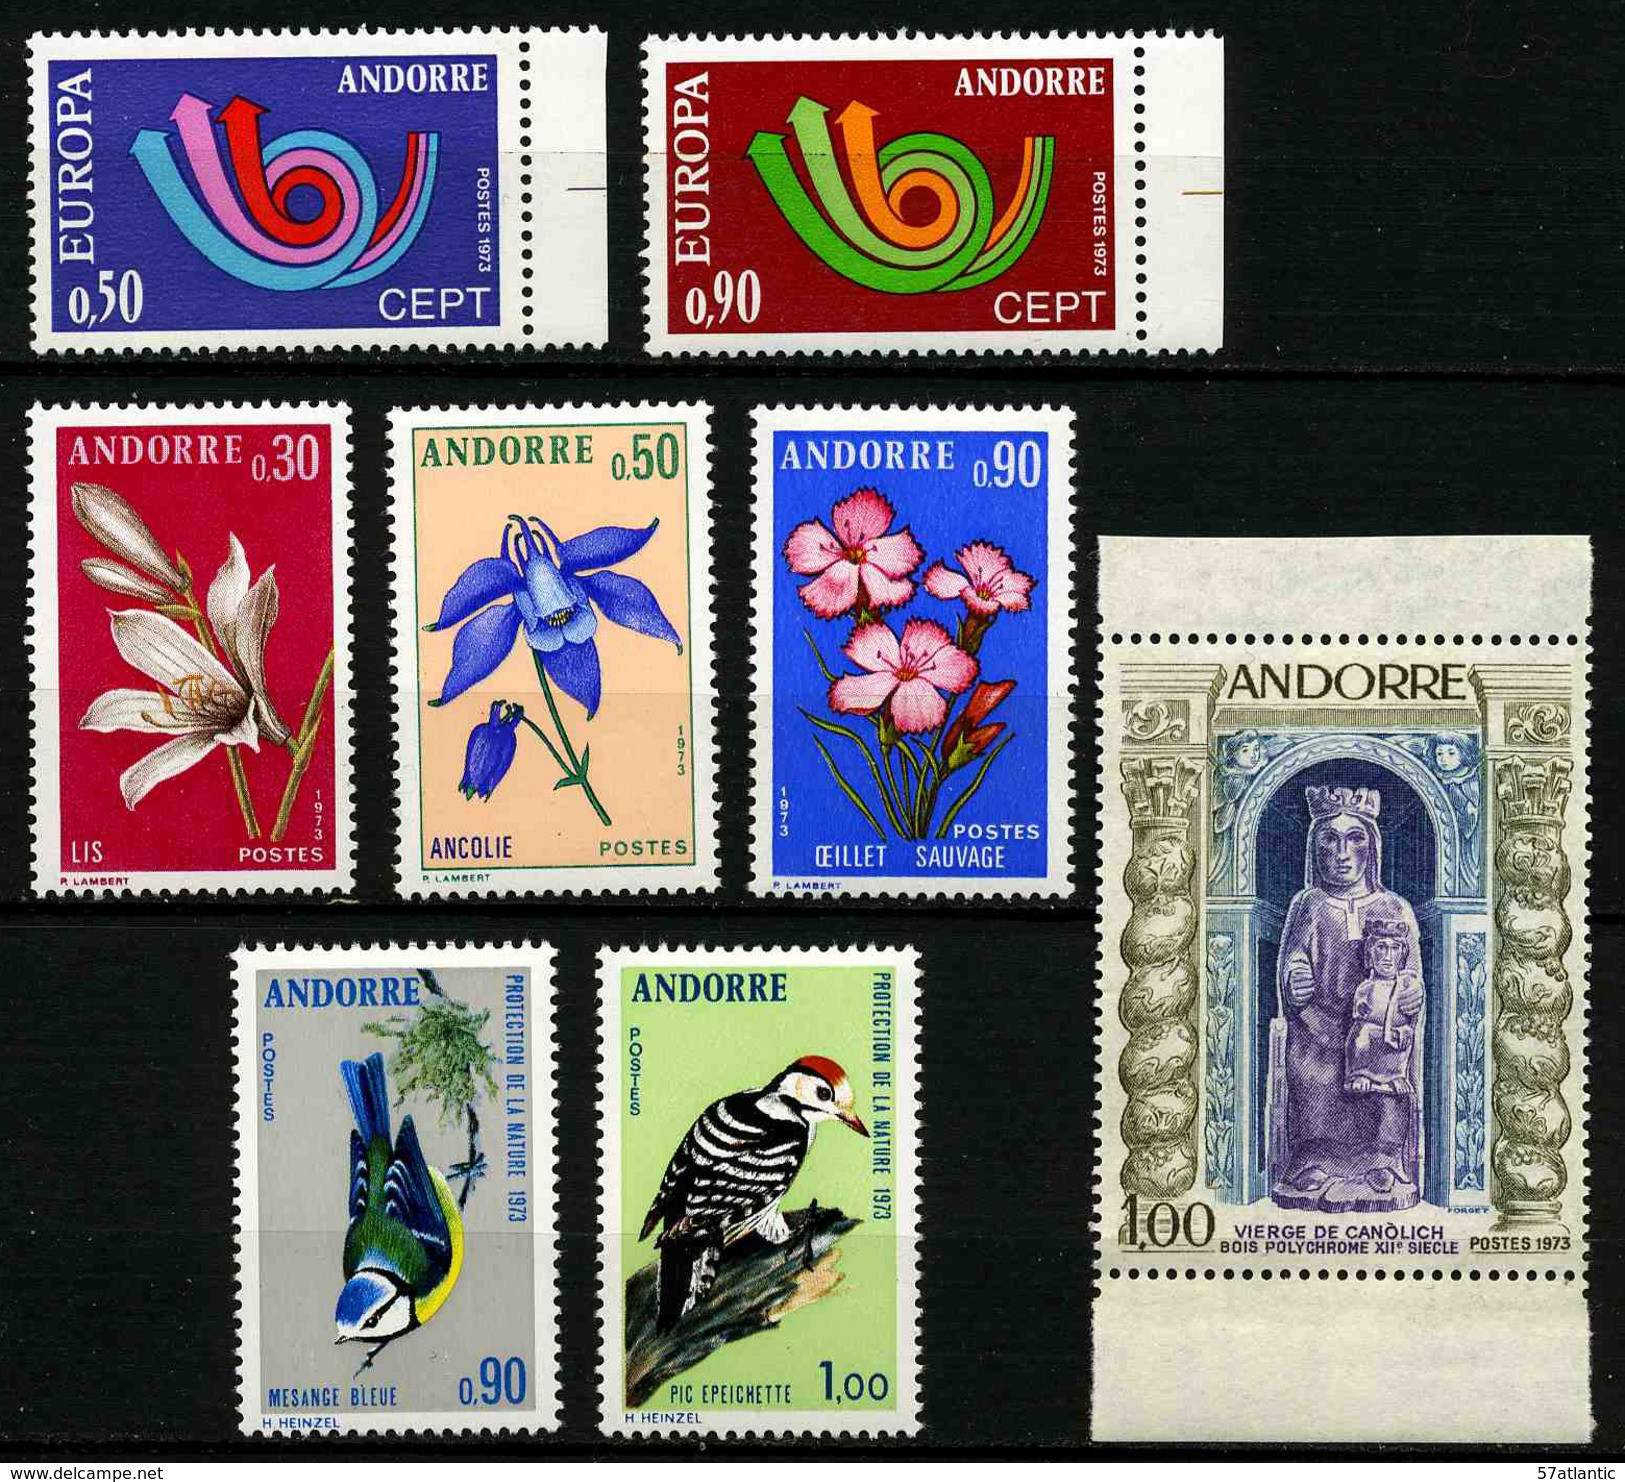 ANDORRE FRANCAIS - ANNEE COMPLETE 1973 - YT 226 à 233 ** -  TIMBRES NEUFS ** - Full Years